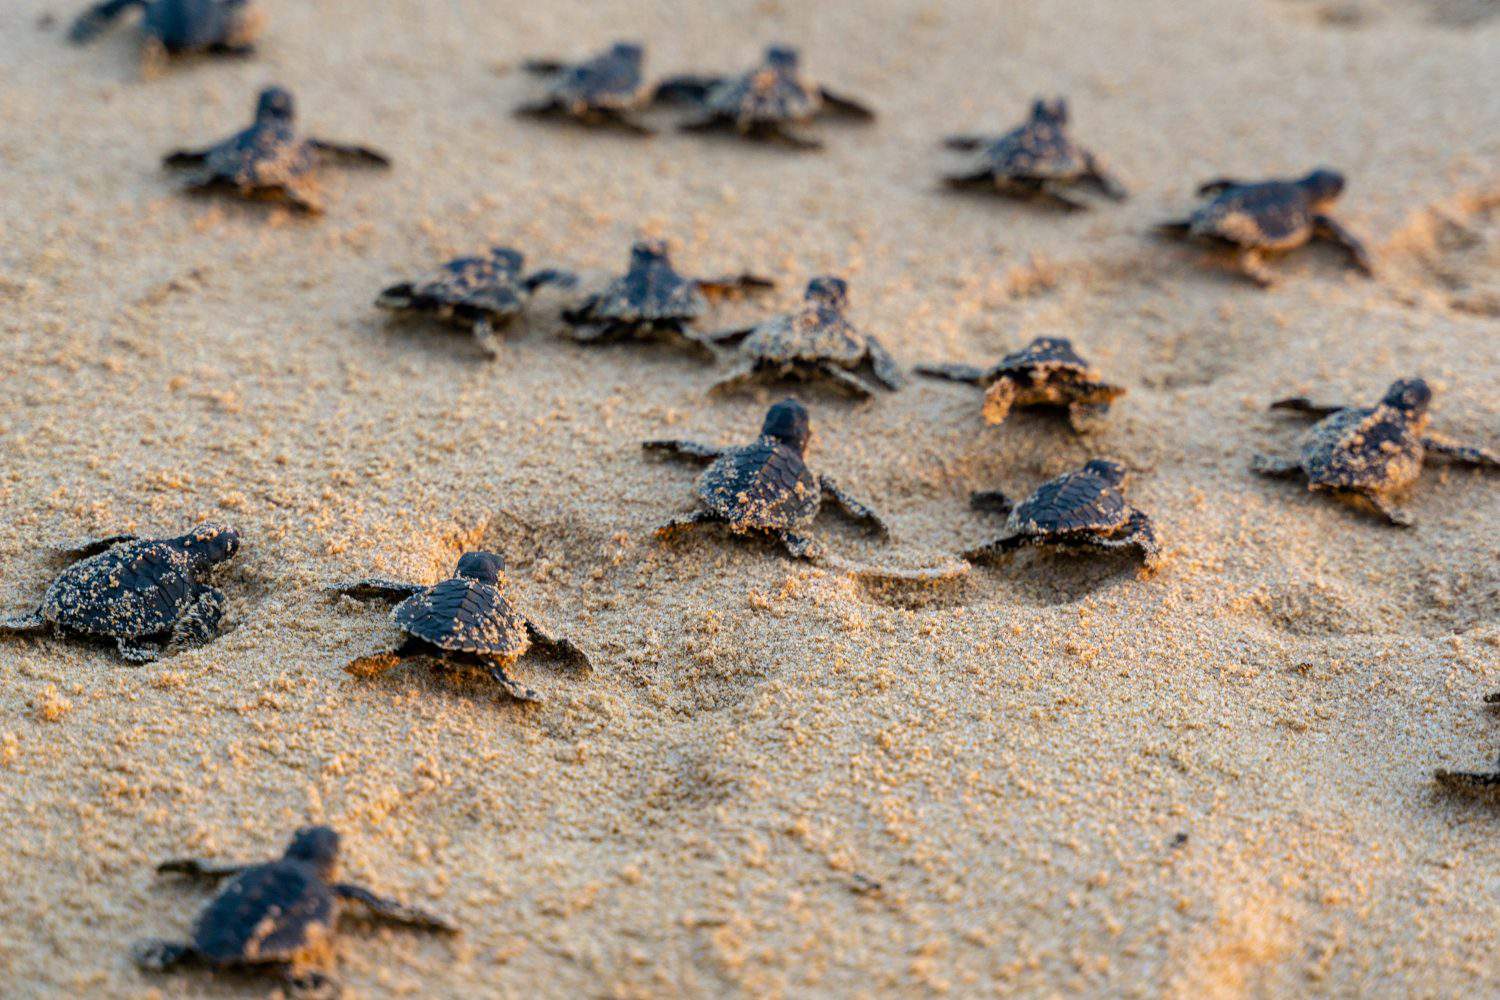 Endangered young baby turtles in warm evening sunlight being released at a beach in Sri Lanka, fighting their way towards the ocean. The recently hatched turtles are prone to be attacked by predators.